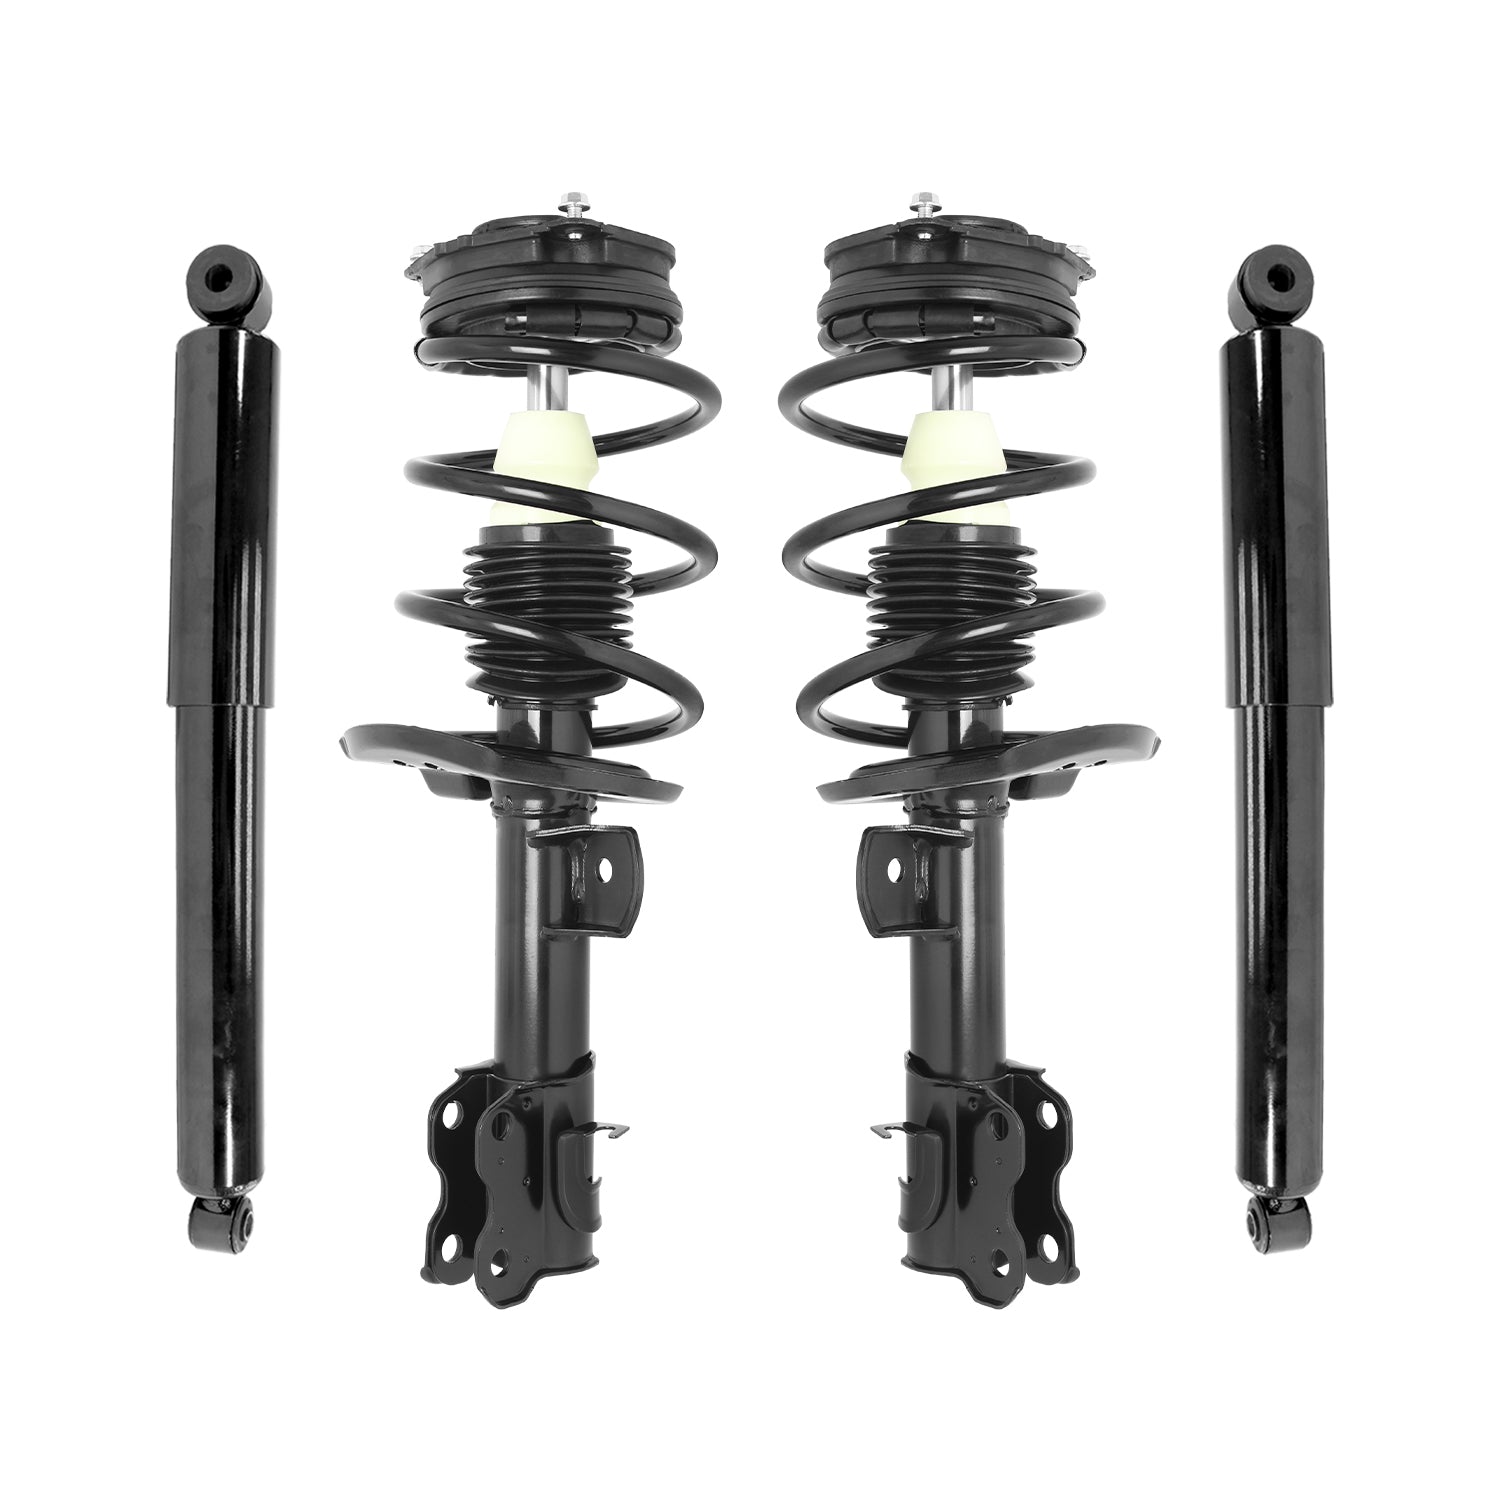 Unity 4-11455-255350-001 Front & Rear Suspension Strut and Shock Absorber Assembly Kit for 2013-2019 Nissan Sentra FWD